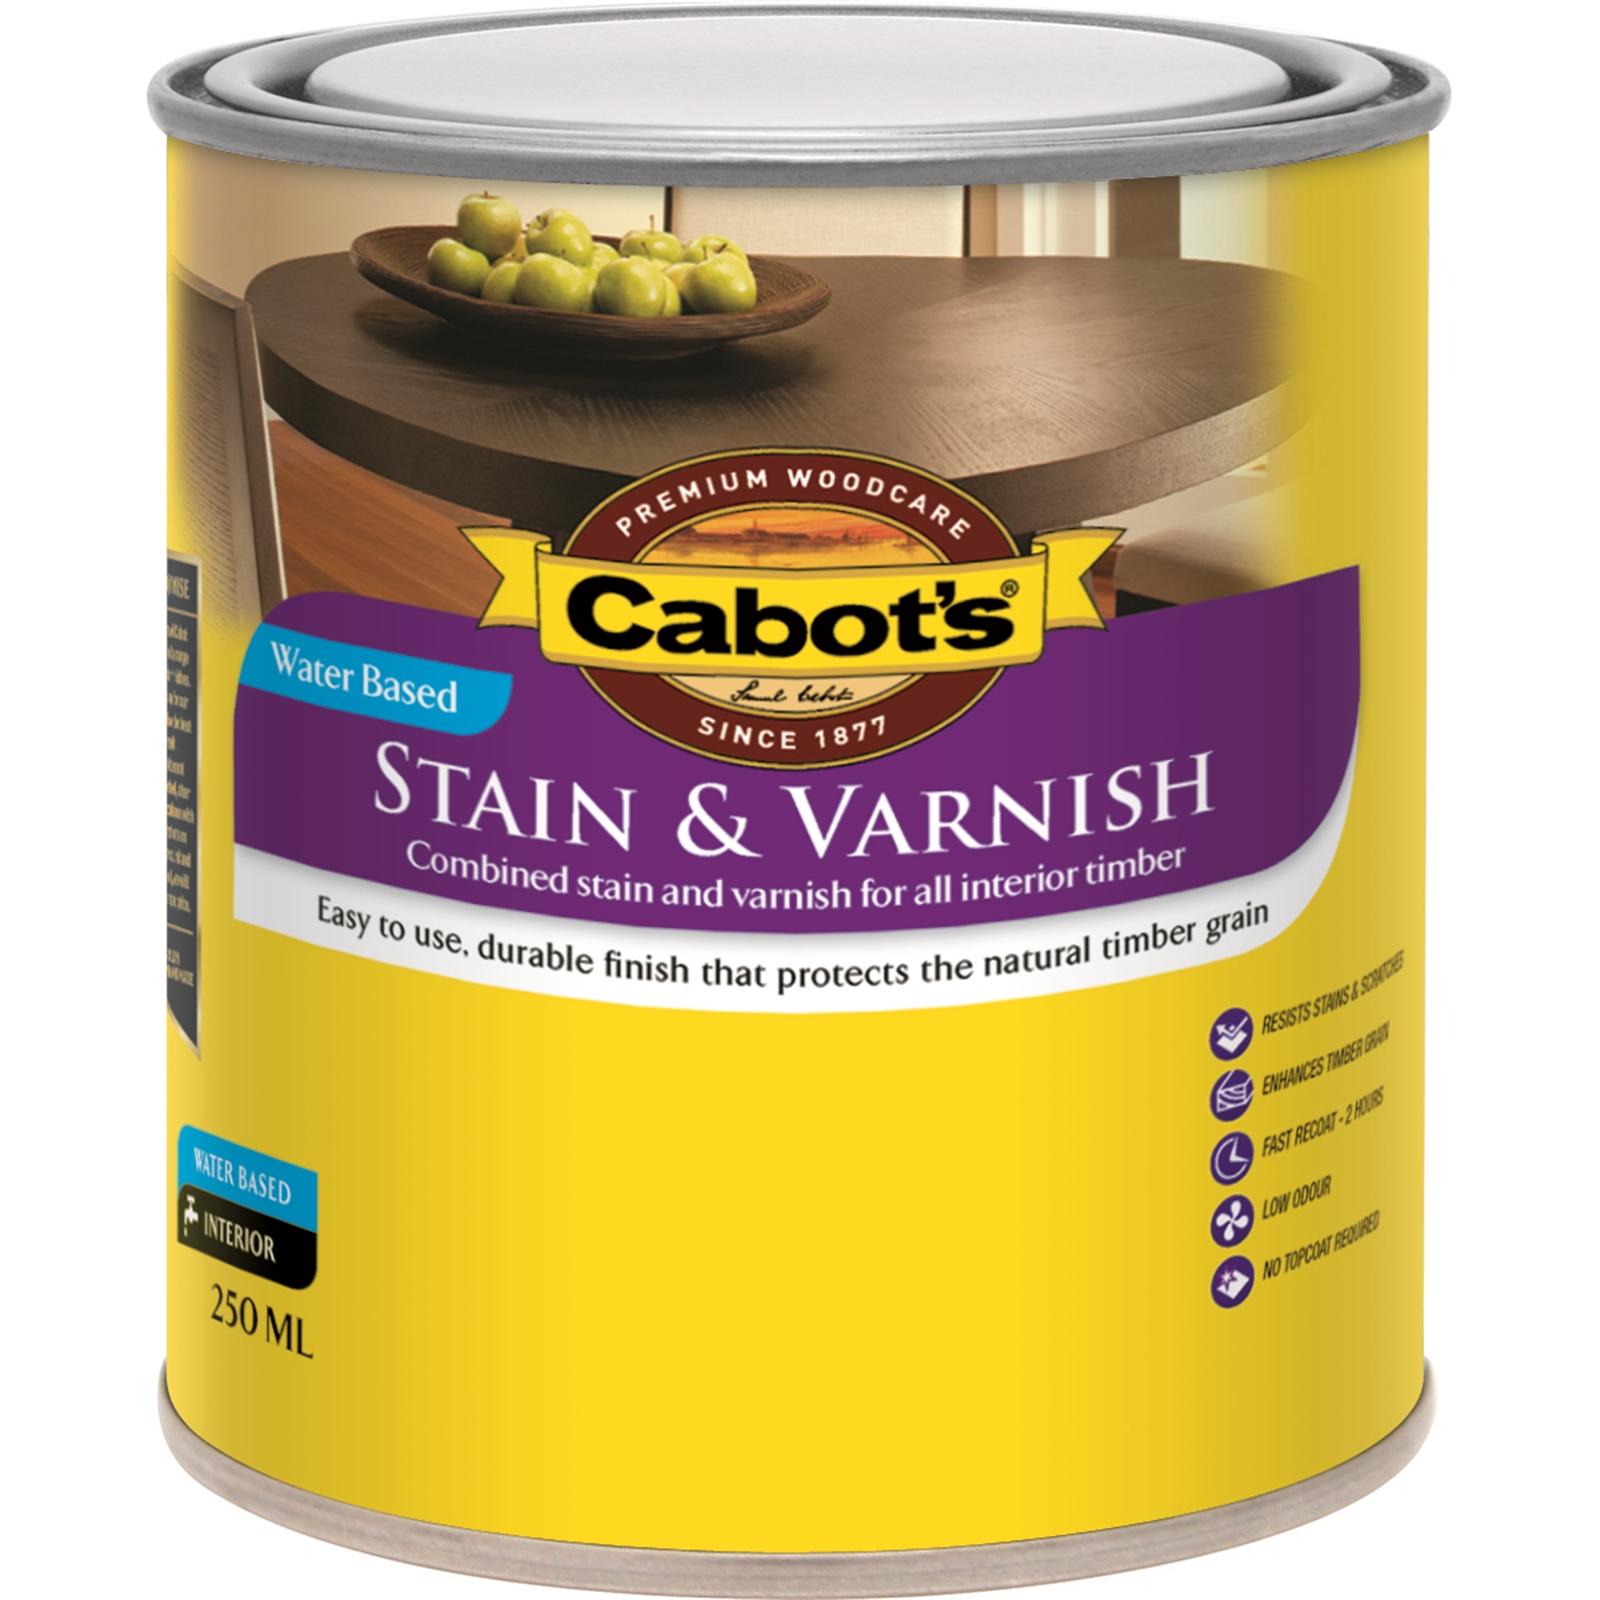 Cabot's 250ml Satin Water Based Stain and Varnish